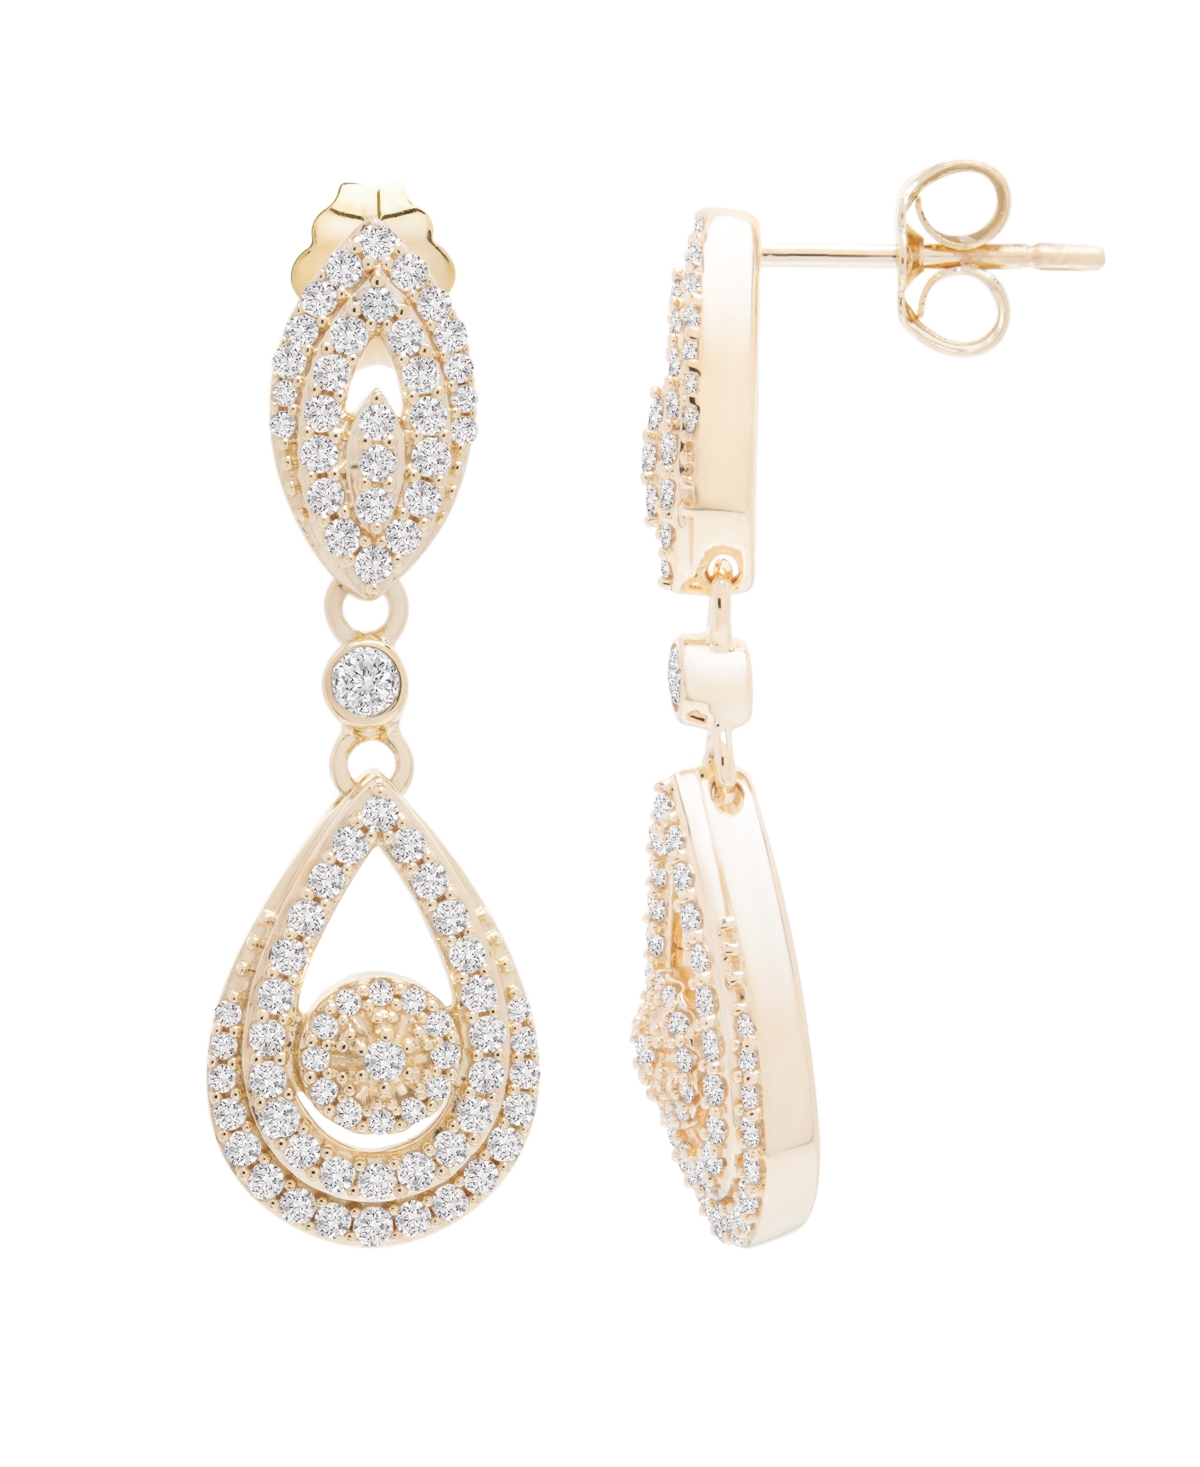 Diamond Dangling Drop Earrings in 14k White Gold or 14k Yellow Gold (1 ct. t.w.), Created for Macy's - Yellow Gold